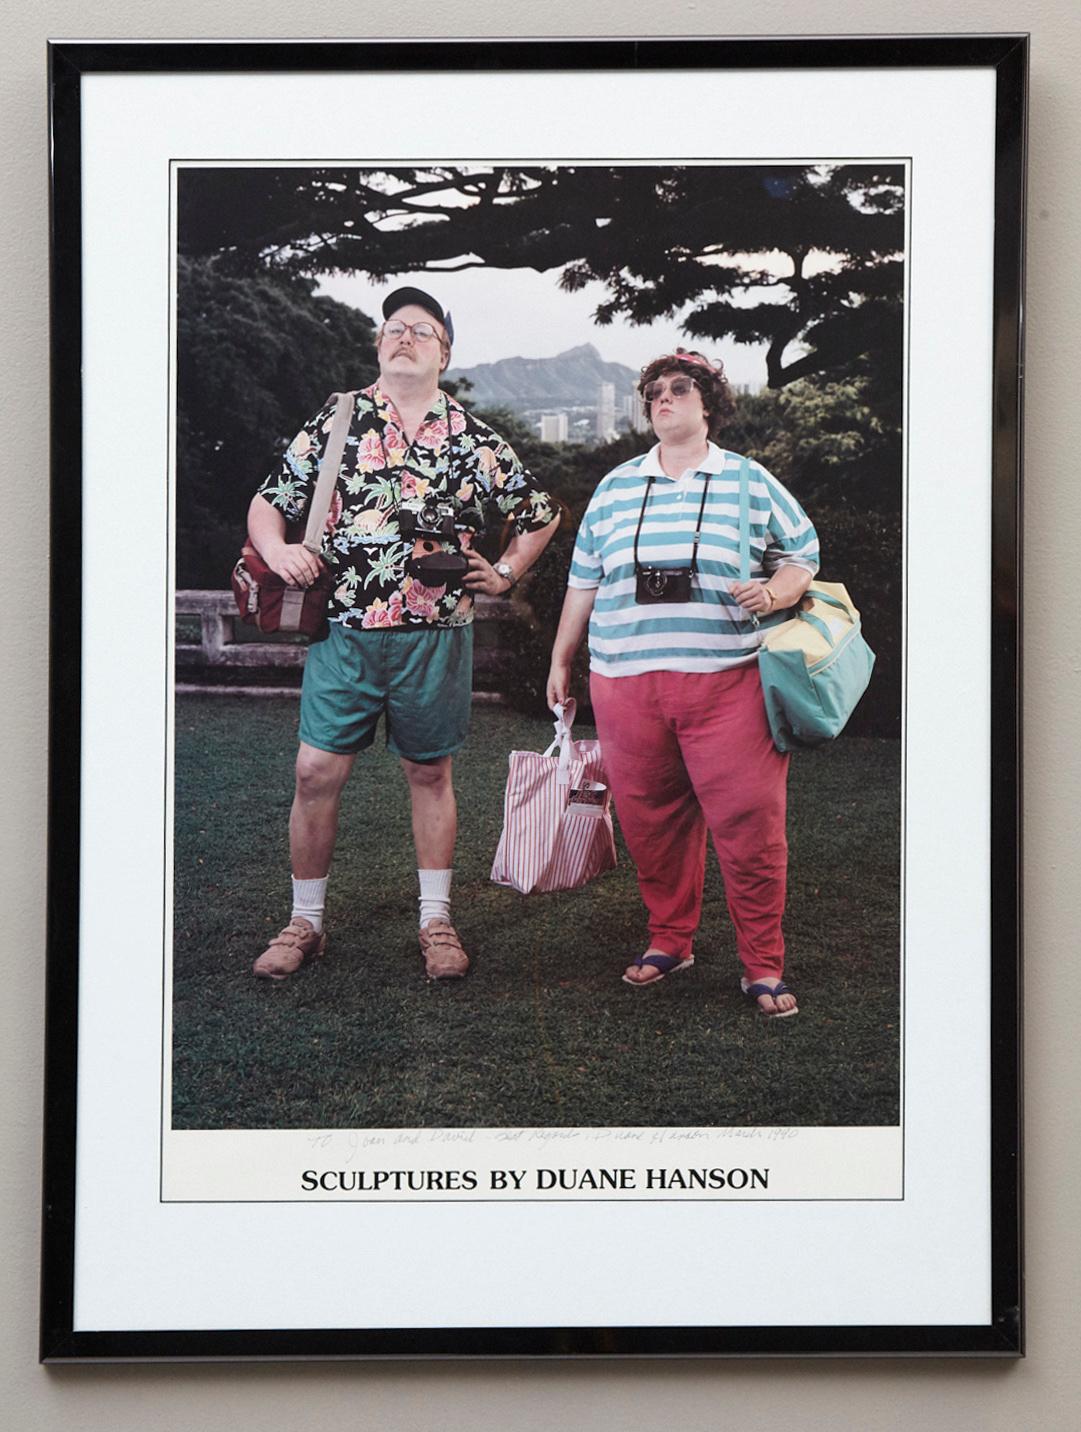 Duane Hanson, American (1925 - 1996)
Sculptures by Duane Hanson, Cranbrook Academy of art Museum, 1990
Photograph, Edition unknown, Signed and dedicated. Framed.
Framed under glass in a black metal frame, very good condition.
Measurements: Frame H